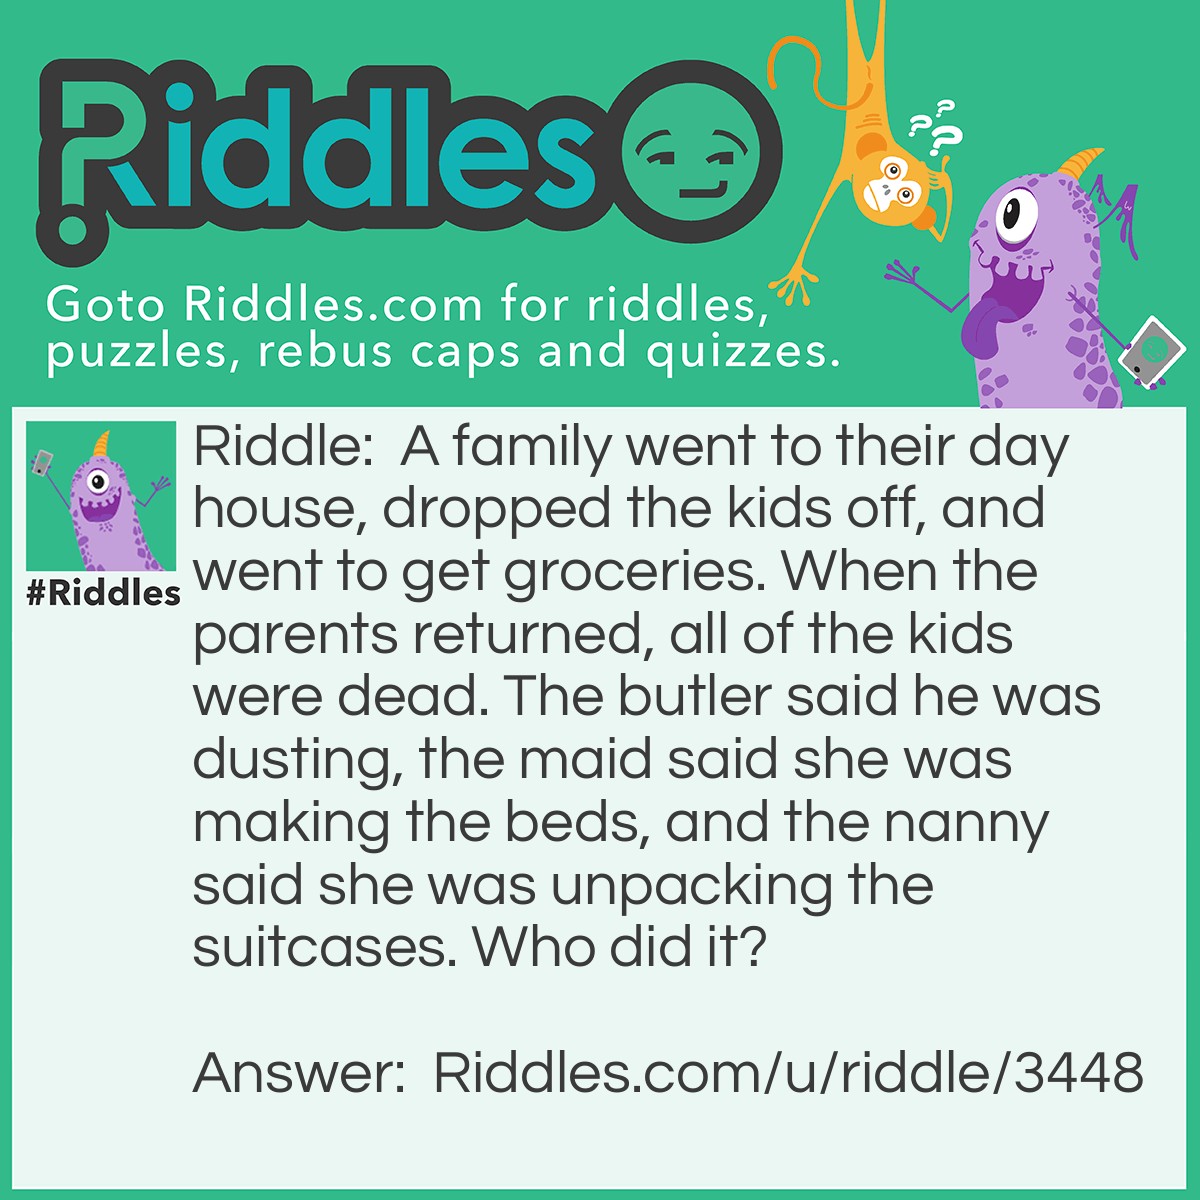 Riddle: A family went to their day house, dropped the kids off, and went to get groceries. When the parents returned, all of the kids were dead. The butler said he was dusting, the maid said she was making the beds, and the nanny said she was unpacking the suitcases. Who did it? Answer: The maid because it was a day house and there are no beds.